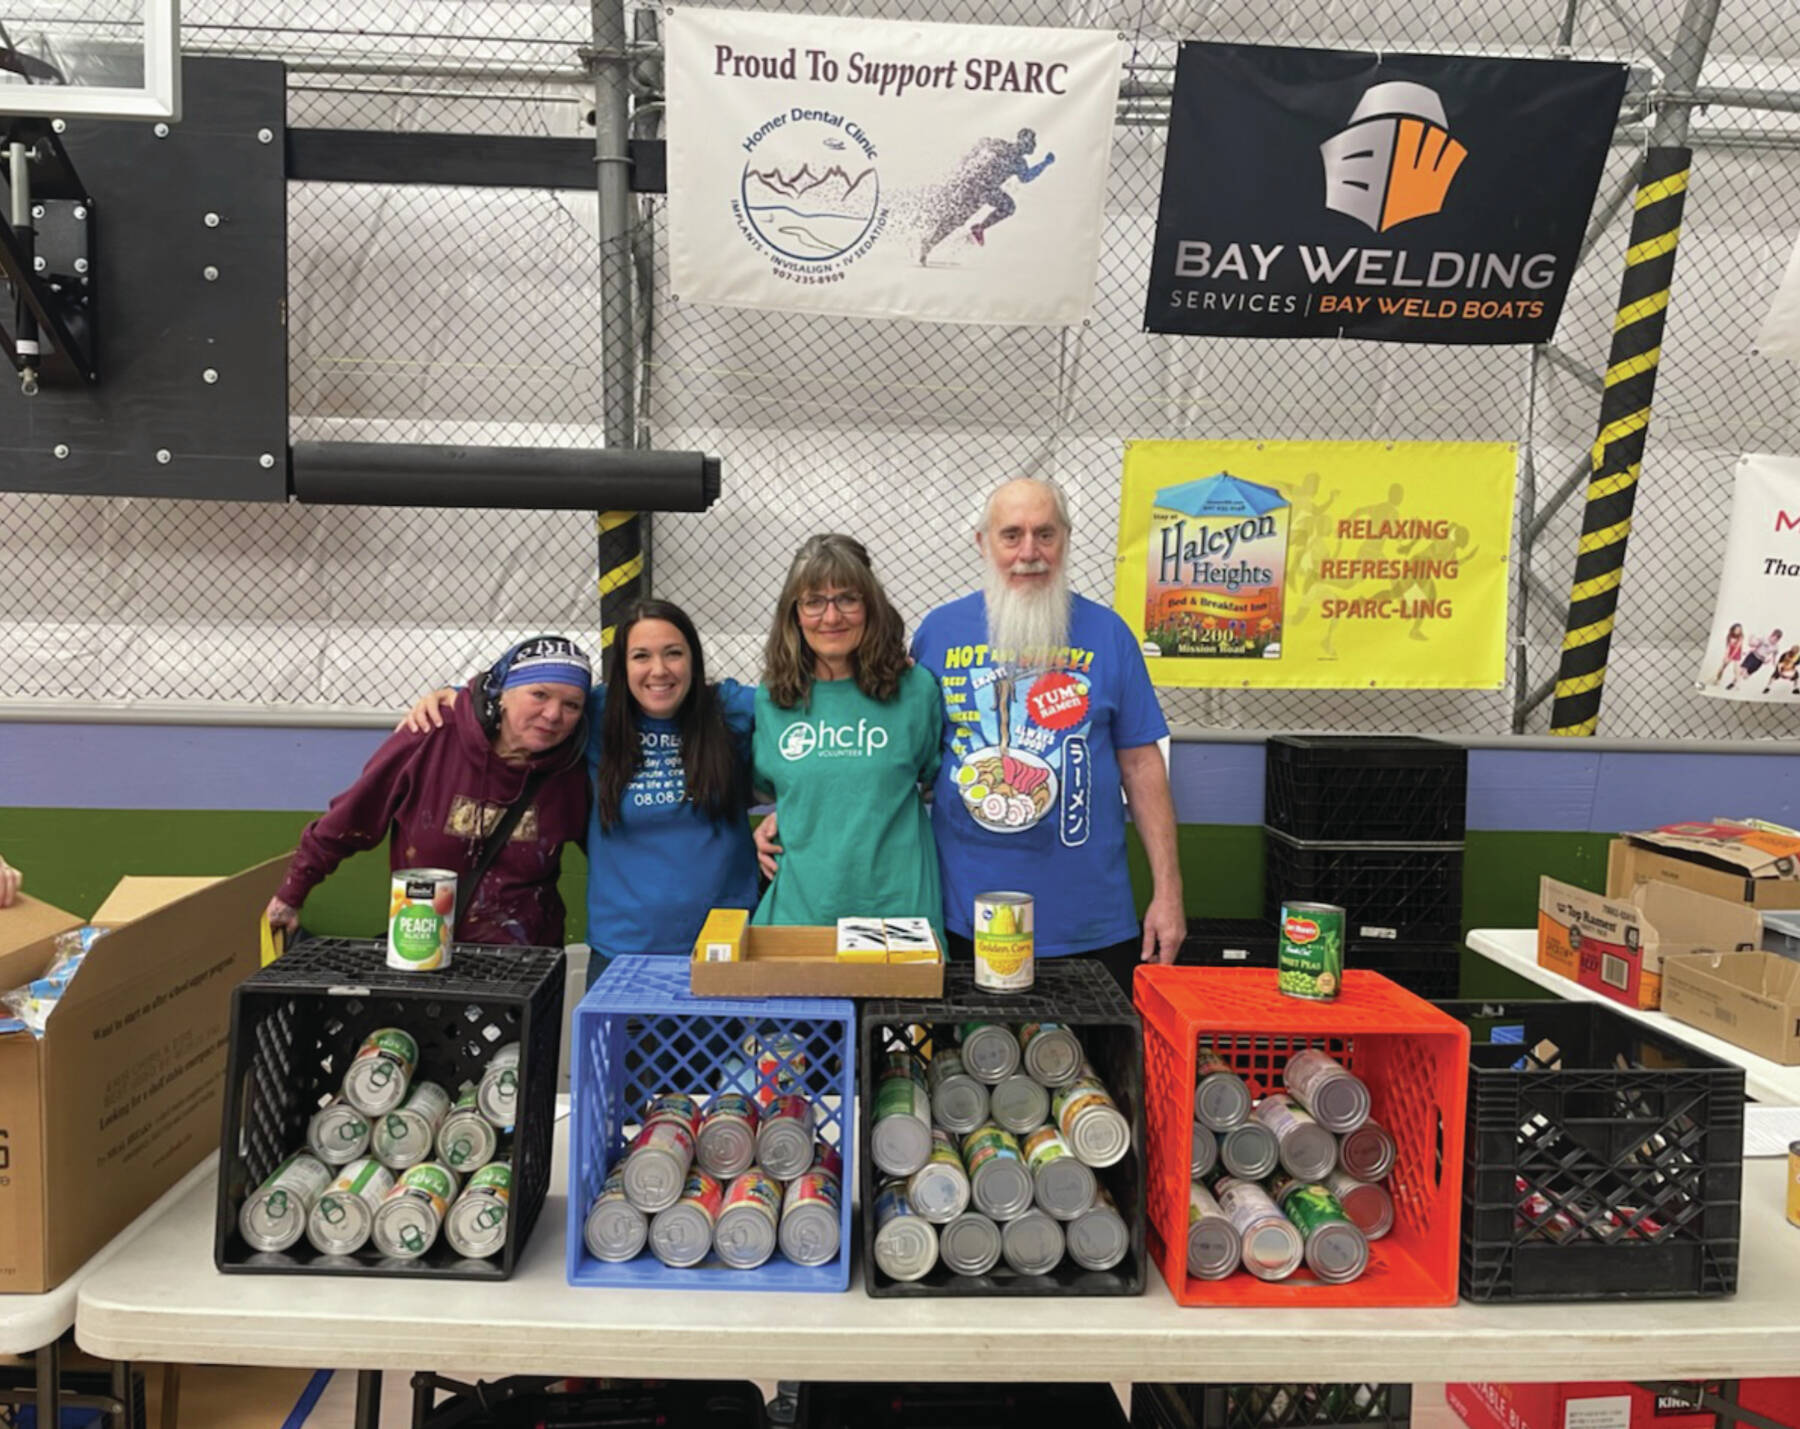 Emilie Springer/Homer News
From left: RJ Nelson, Jaclyn Rainwater, Debbie Vantrease, Wendall Cummings stand at the Homer Community Food Pantry booth at the Community Resource Connect event on Jan. 30 at the SPARC in Homer.